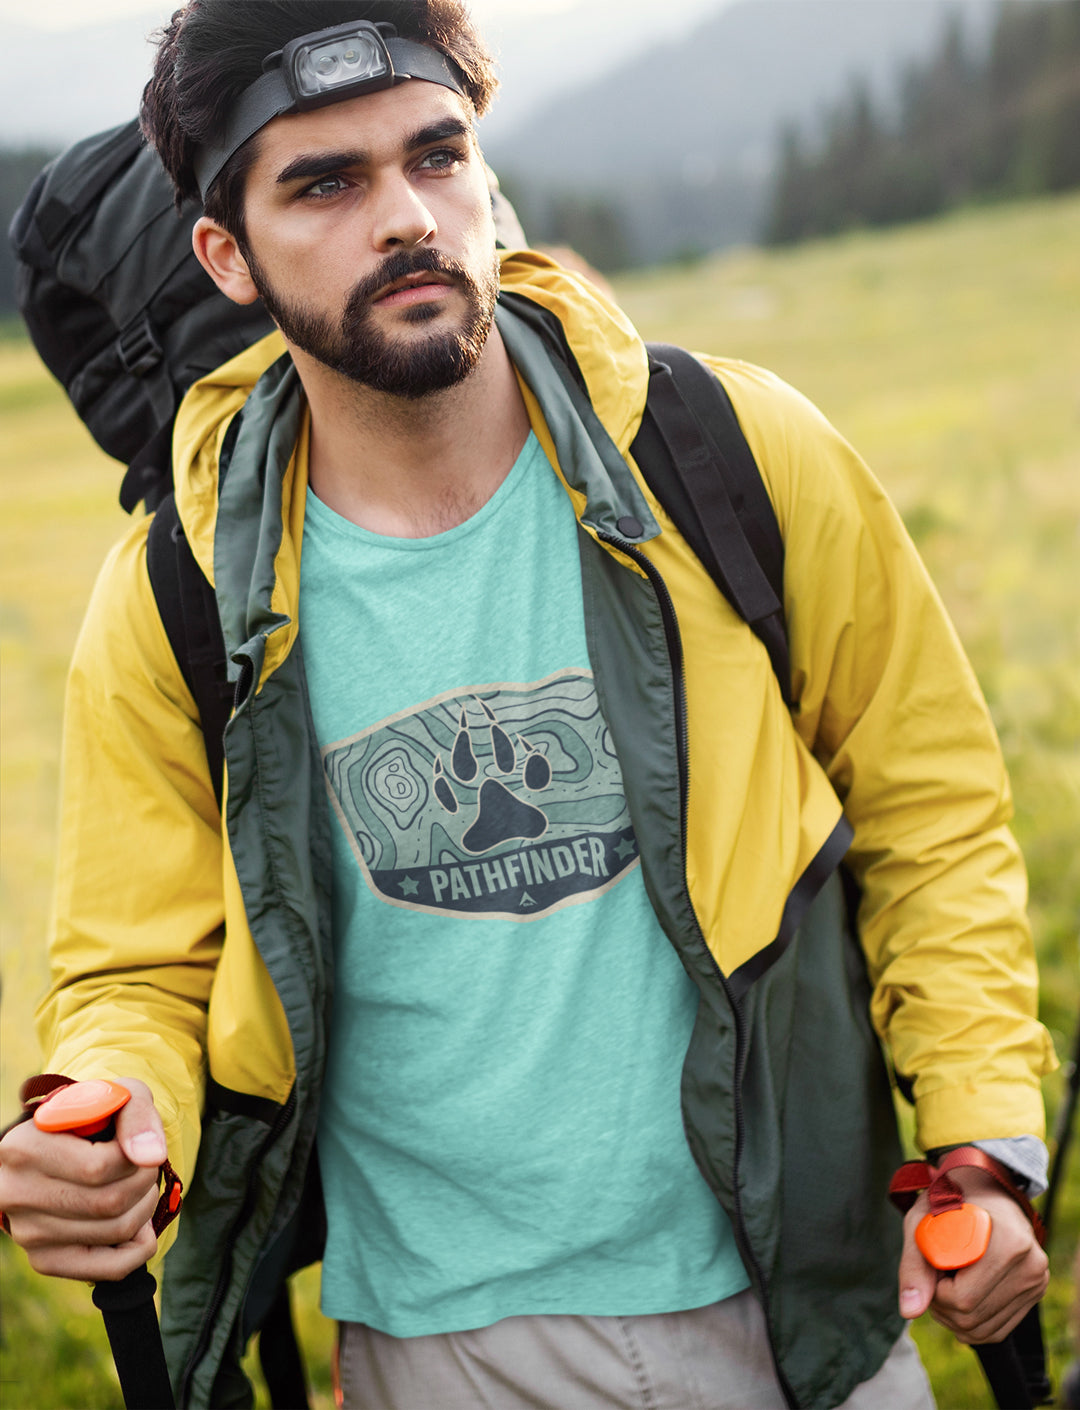 DIA Pathfinder Tracker T-Shirt | Heather Prism Dusty Blue | Men & Women | Track Down Greatness | Your Plan, Your Rules |  Hiking